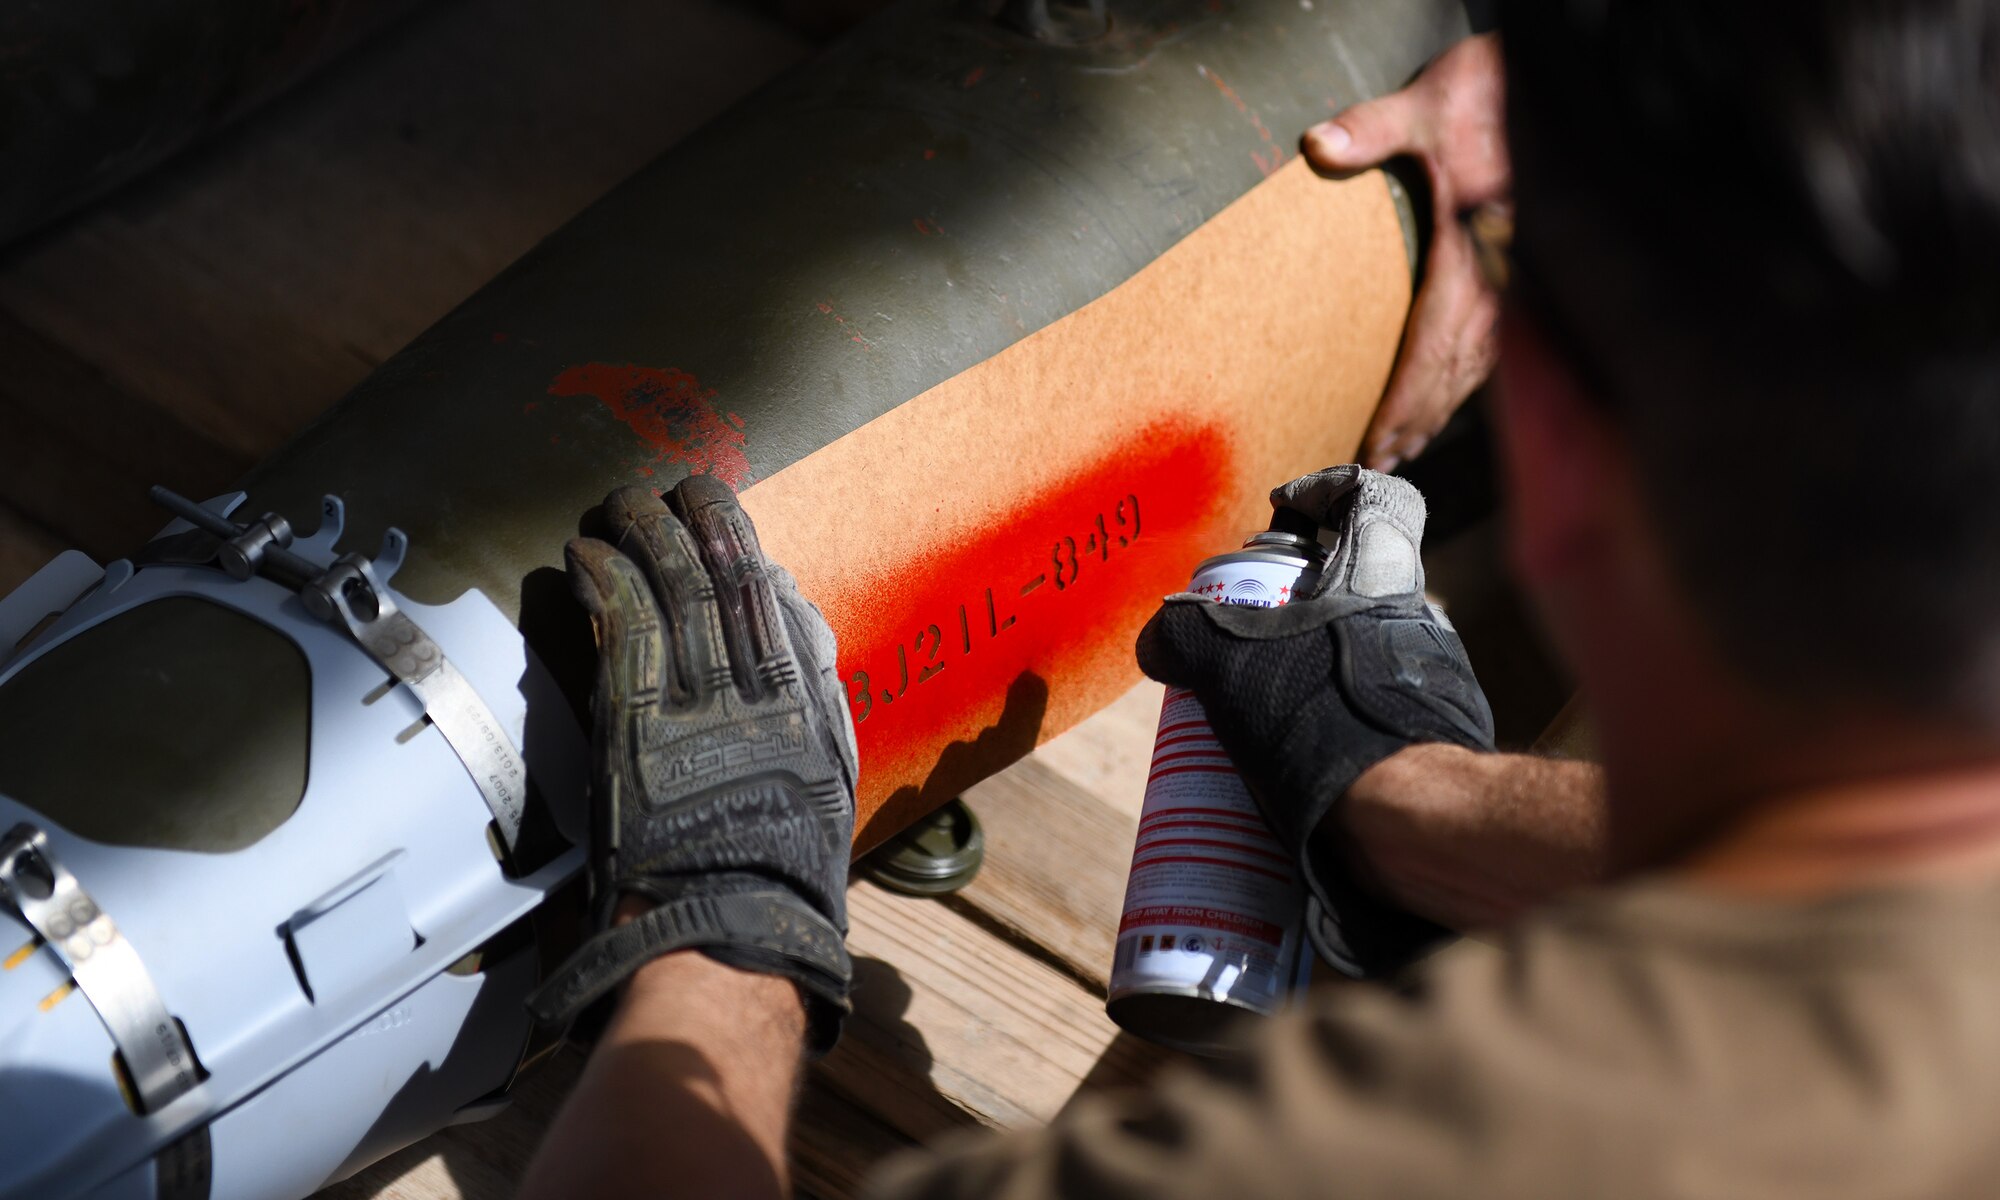 U.S. Air Force Tech. Sgt. Brandon Coleman, 726th Expeditionary Air Base Squadron munitions production supervisor, paints the identifier on munitions during a bomb build at Chabelley Airfield, Djibouti, Nov. 12, 2019. The 726th EABS Munitions Systems Airmen build, inspect and store all munitions at the airfield, ensuring mission effectiveness at a moment’s notice. (U.S. Air Force photo by Staff Sgt. Alex Fox Echols III)